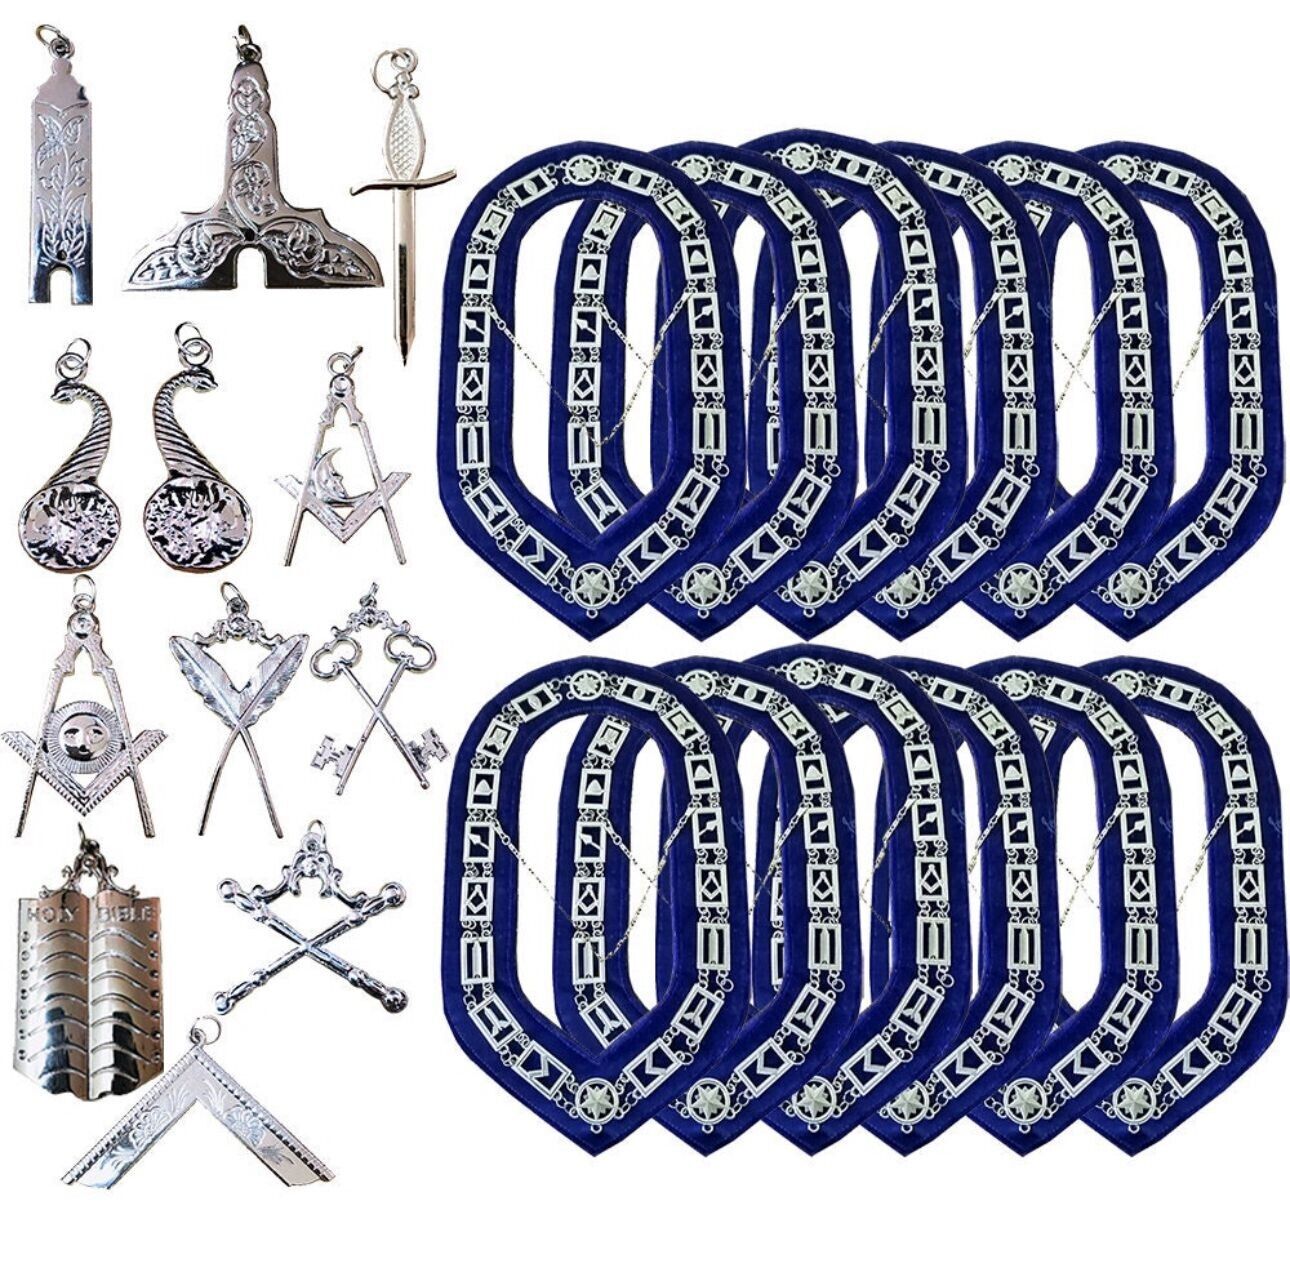 Blue Lodge Masonic Silver Chain Collar With Silver Jewels Blue Backing Set Of 12